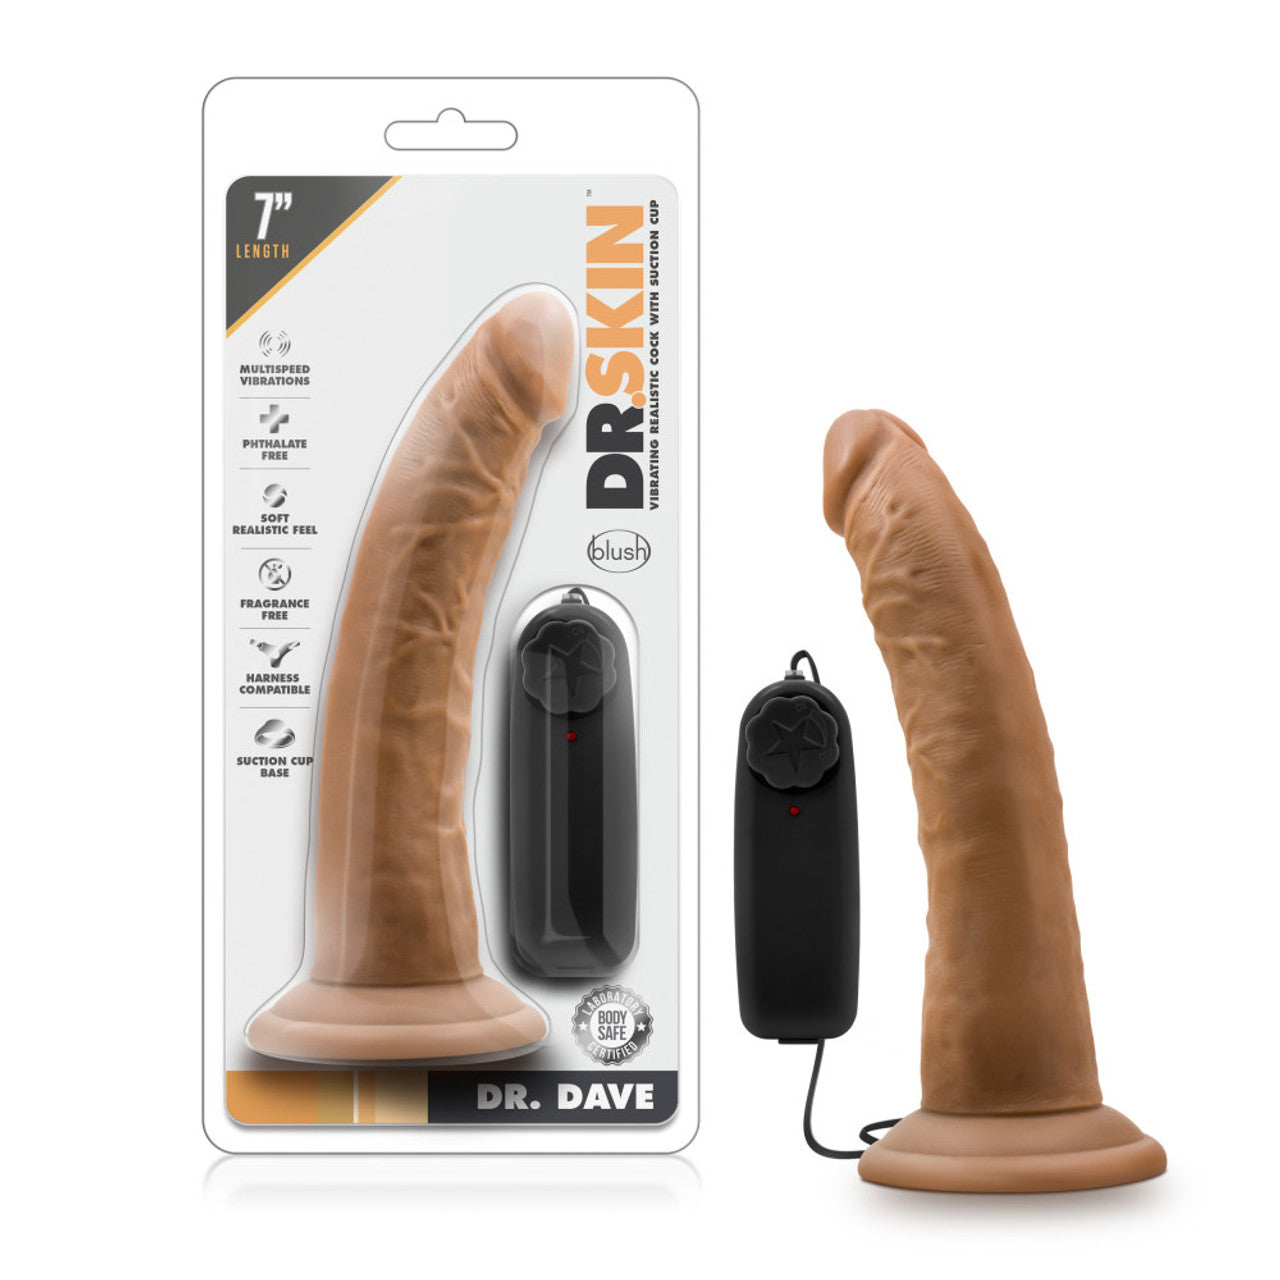 Dr. Skin Dr. Dave 7 Inch Vibrating Cock with Suction Cup - Mocha - Thorn & Feather